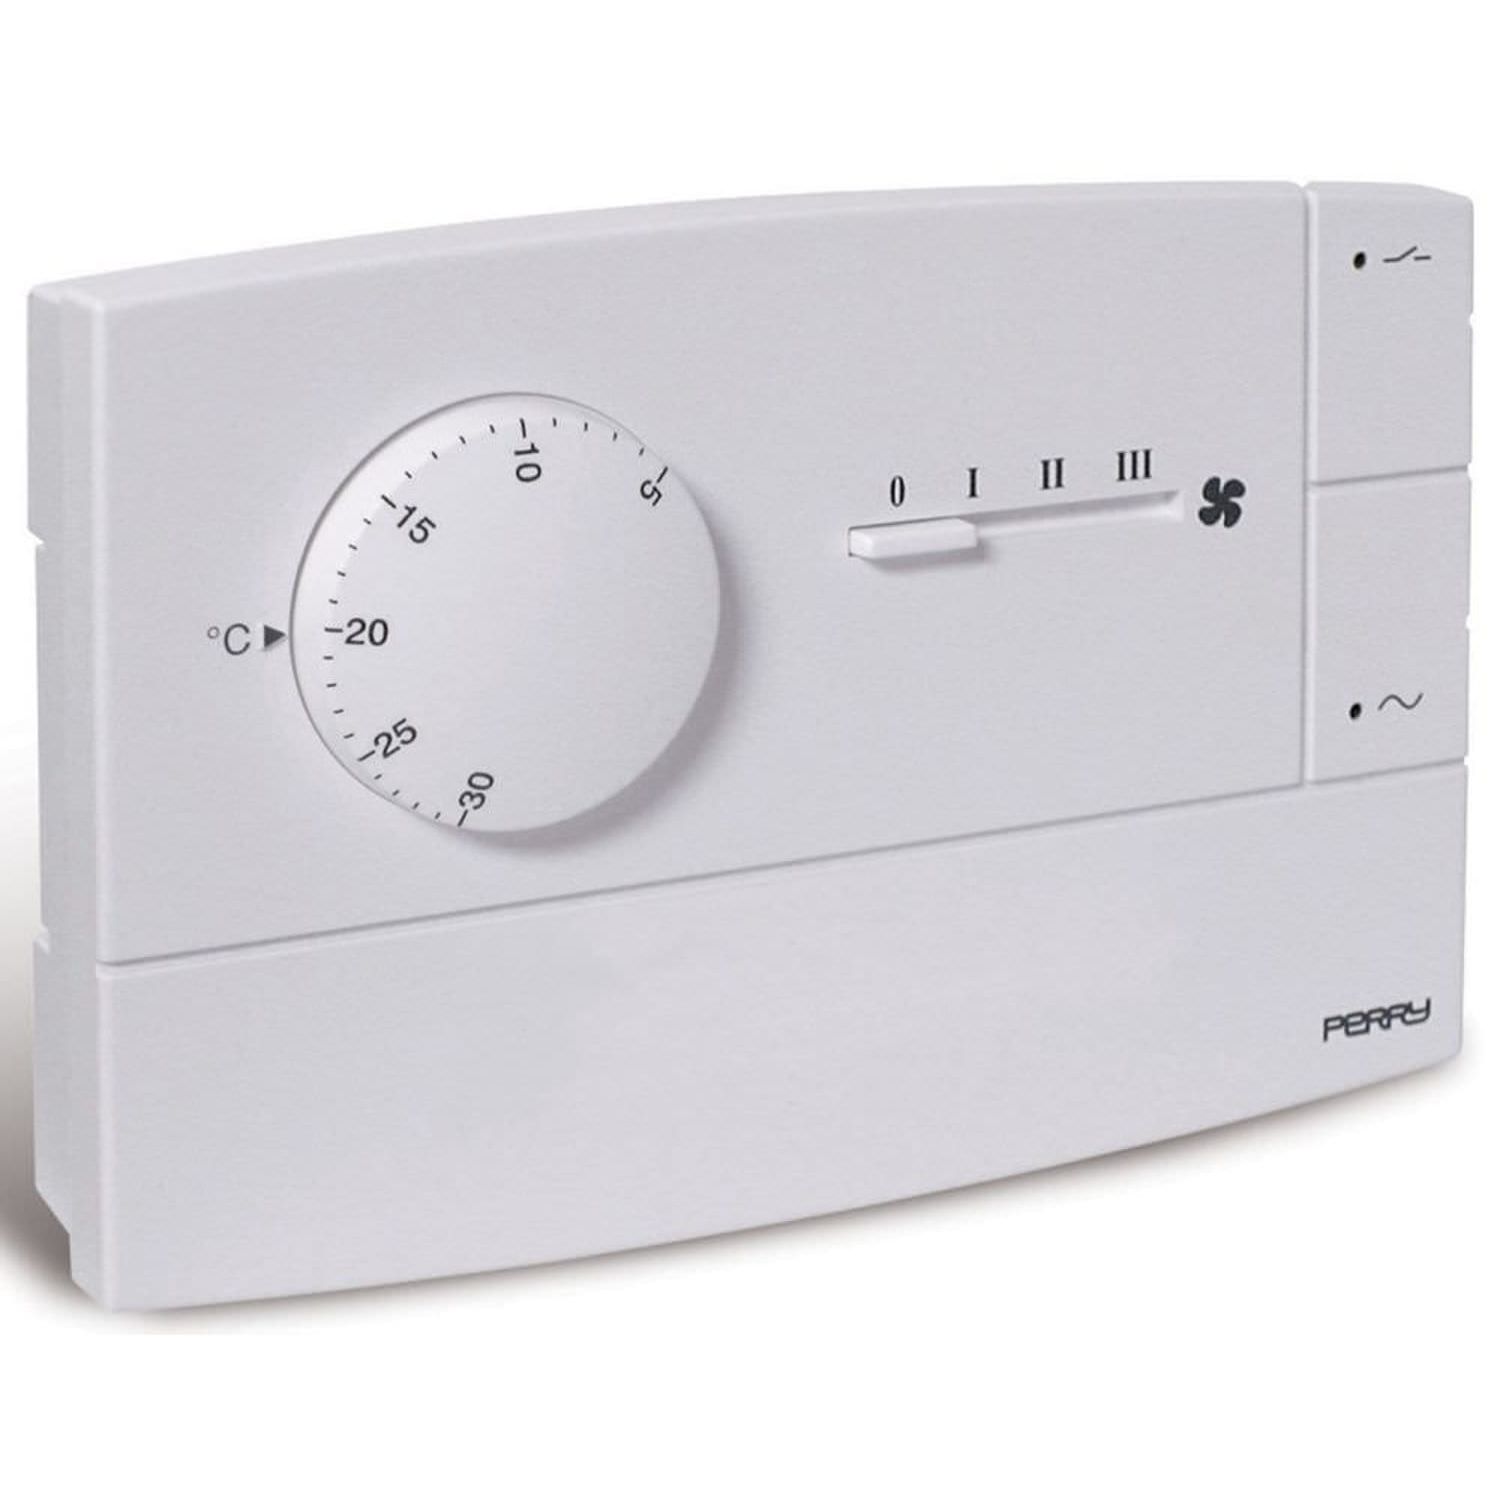 Wall mounted fan coil thermostat white